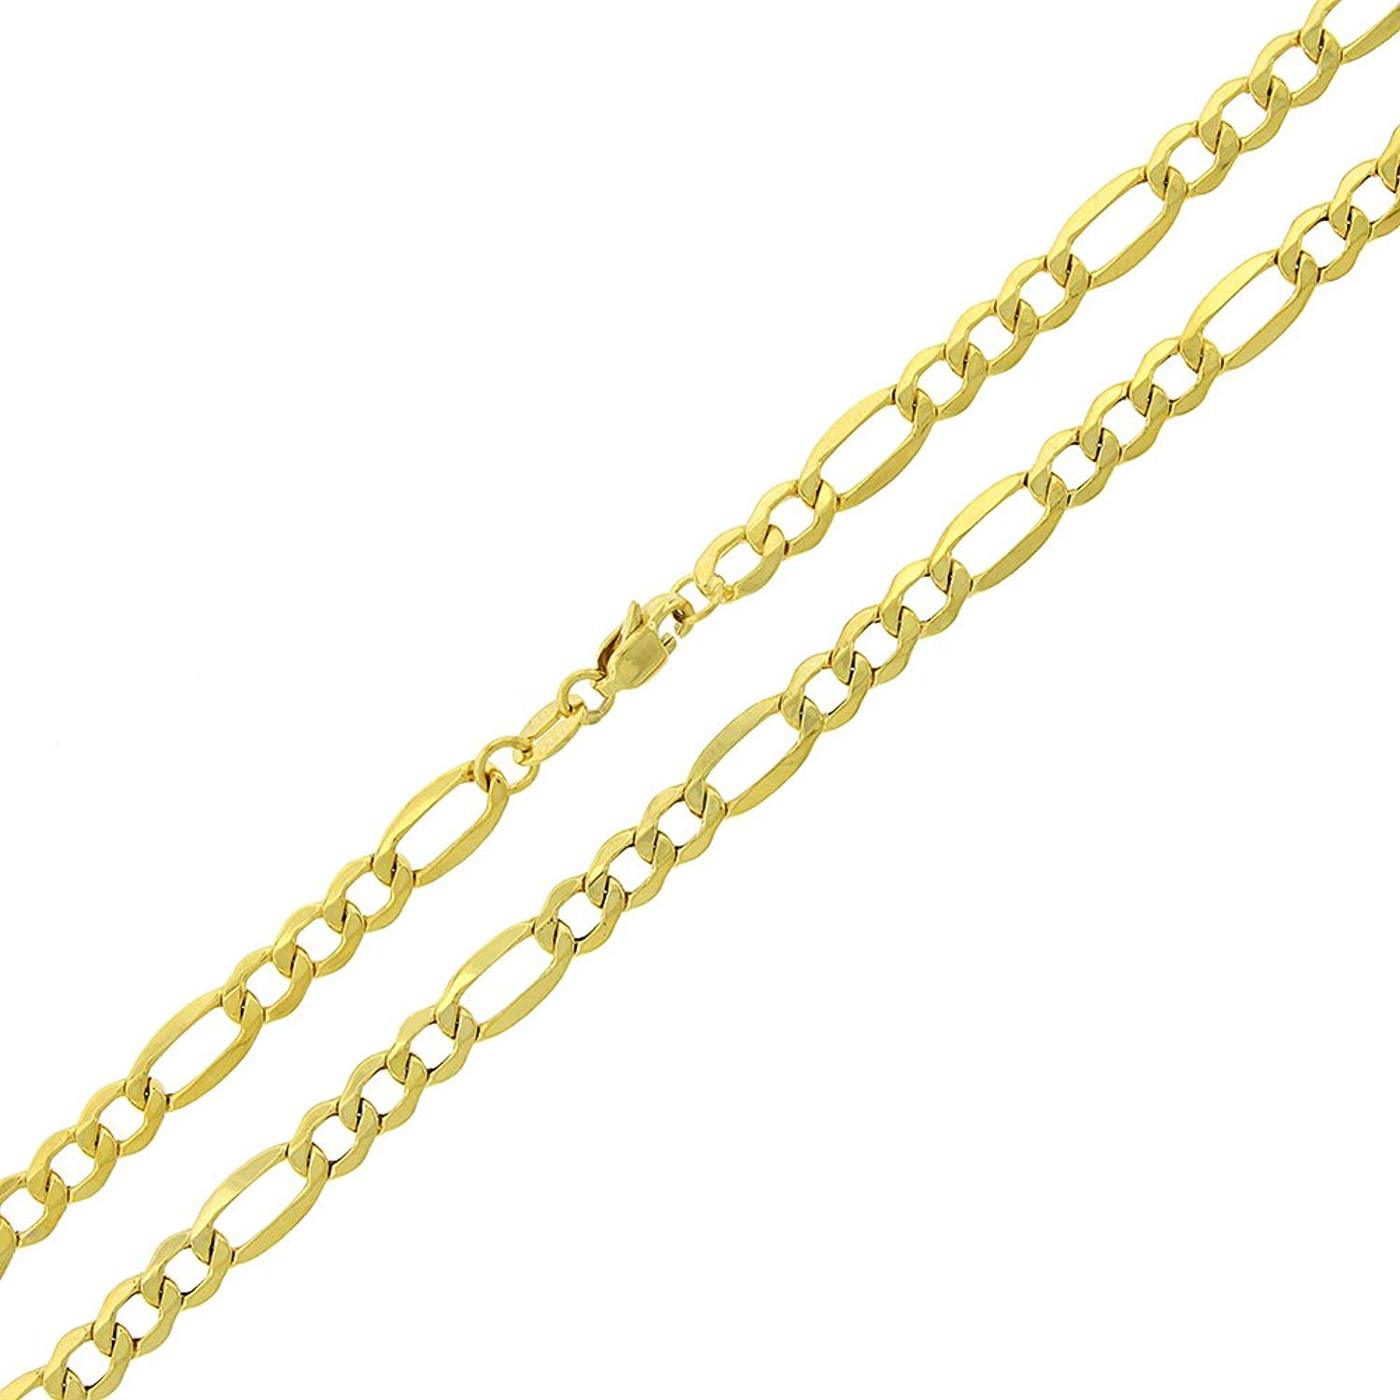 10K Yellow Gold 4.5MM Hollow Figaro Link Necklace Chains